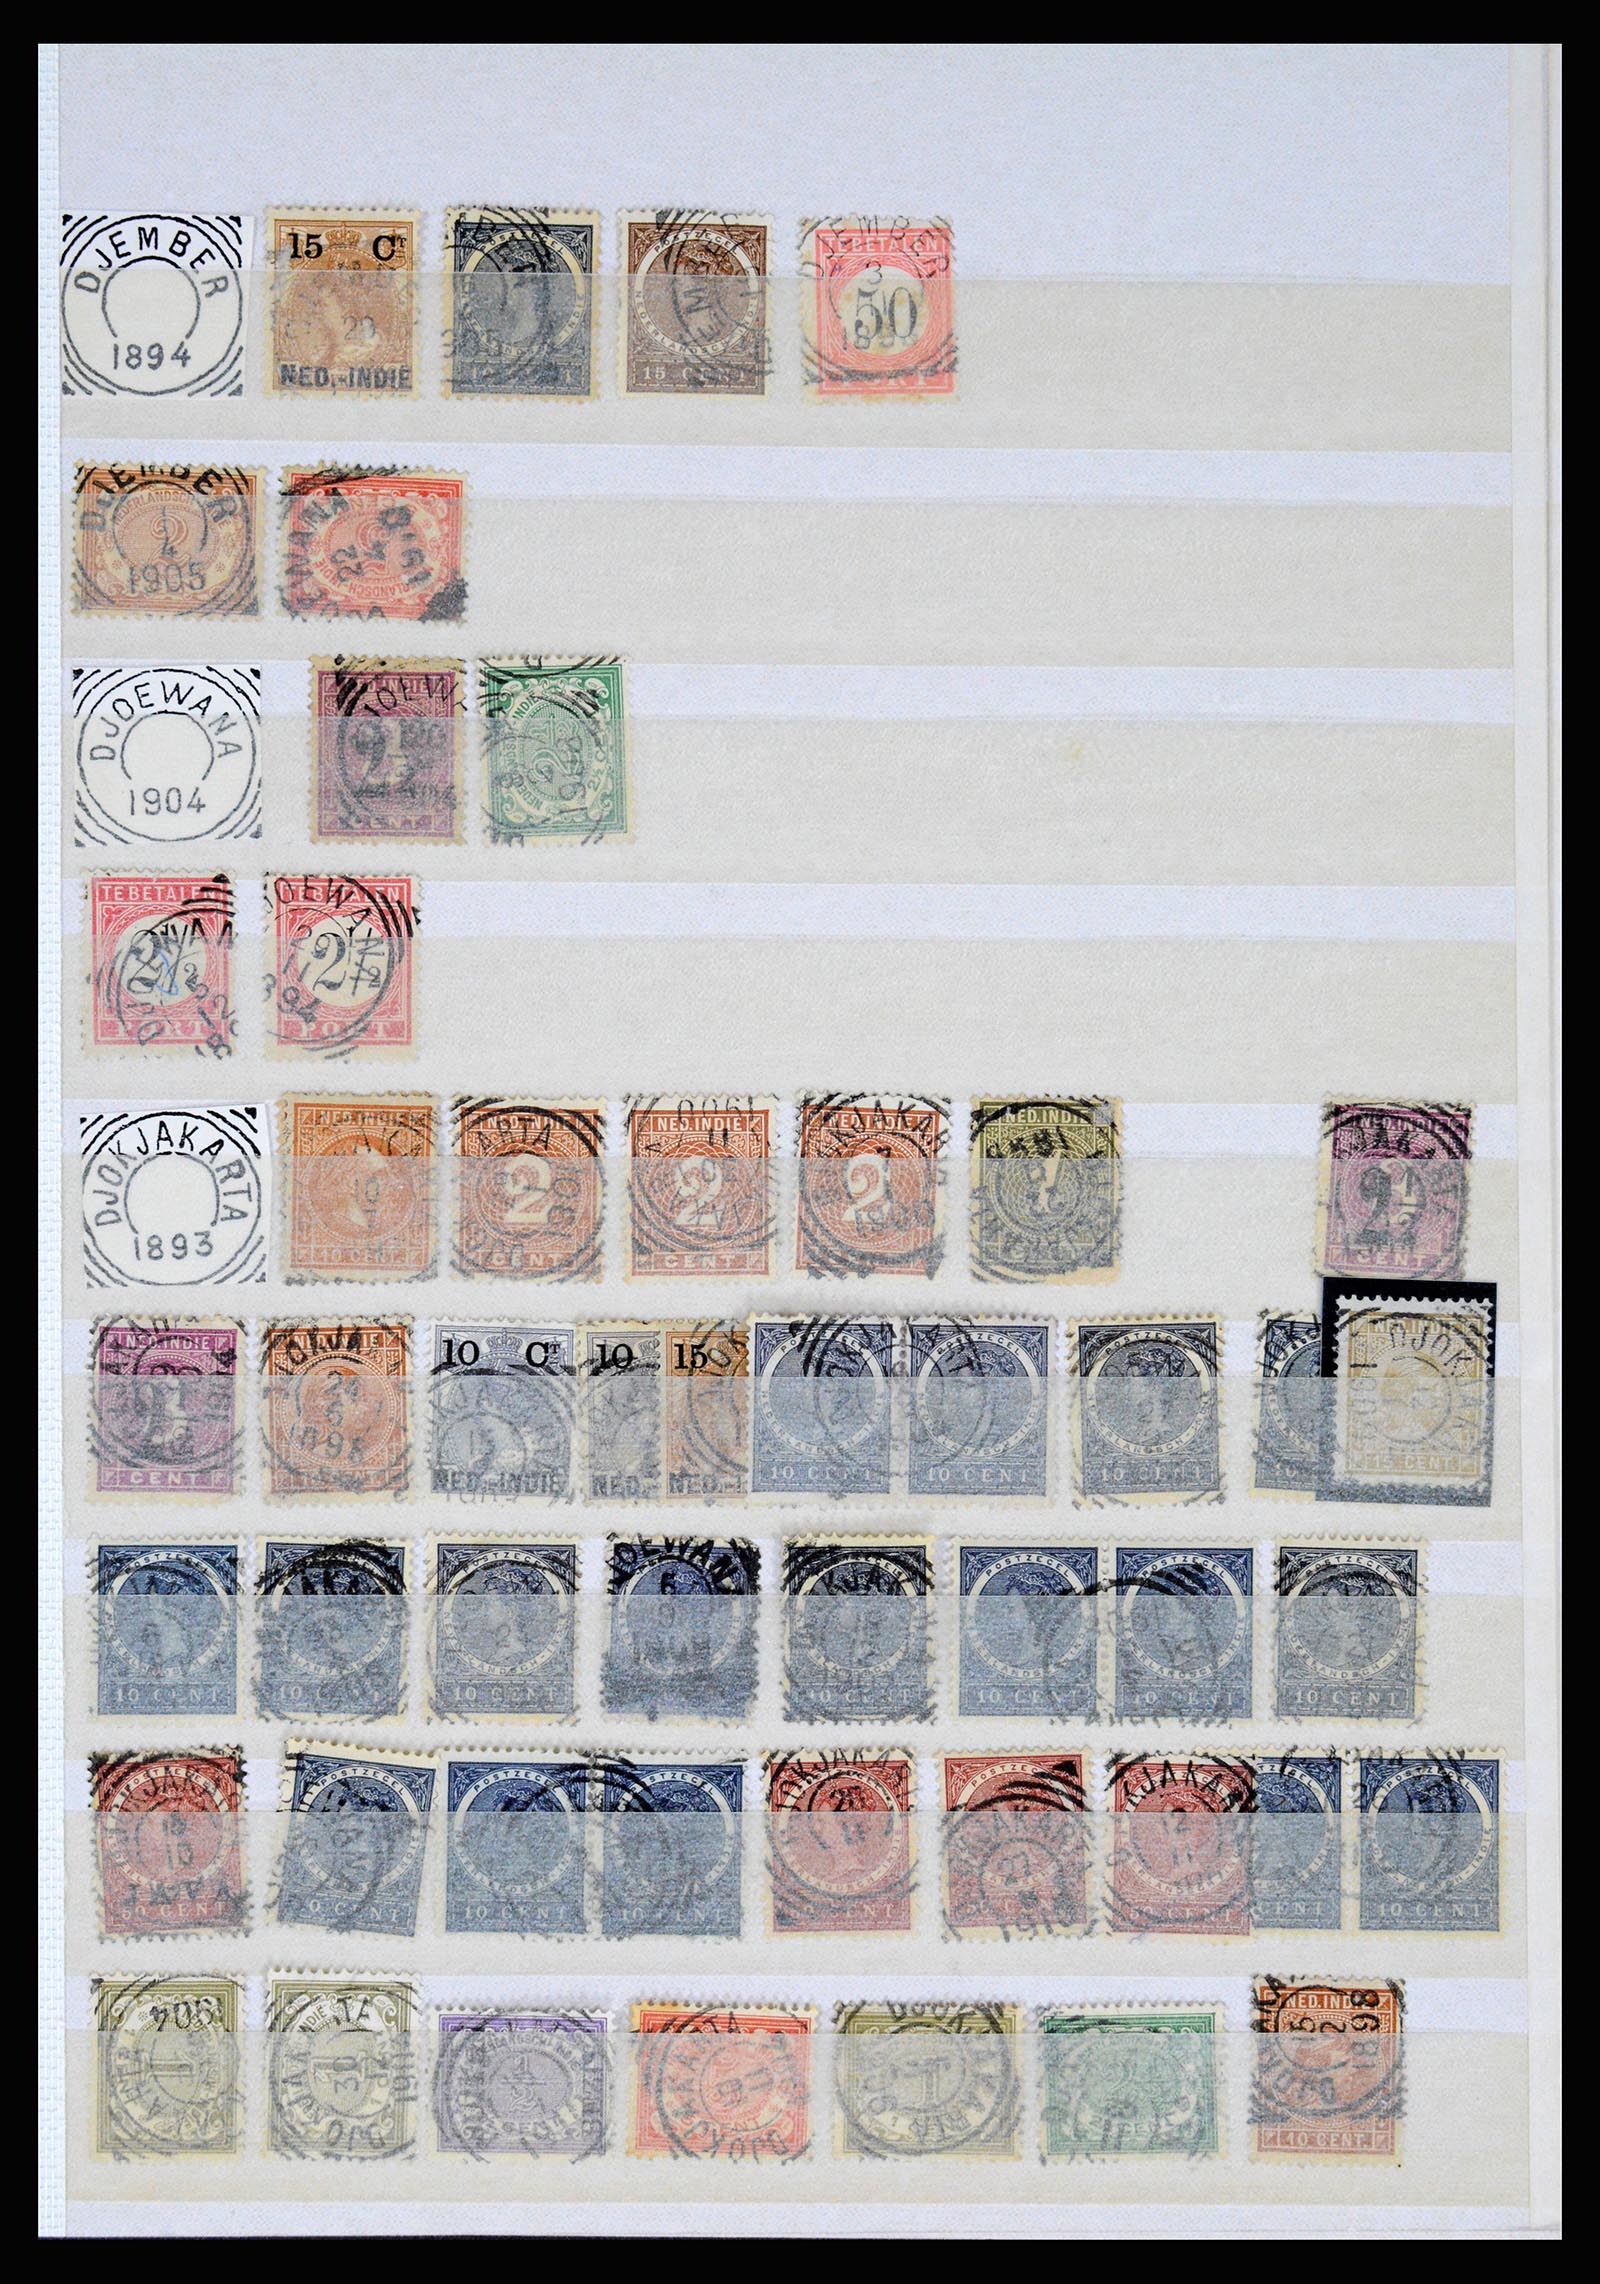 36839 068 - Stamp collection 36839 Dutch east Indies square cancels.